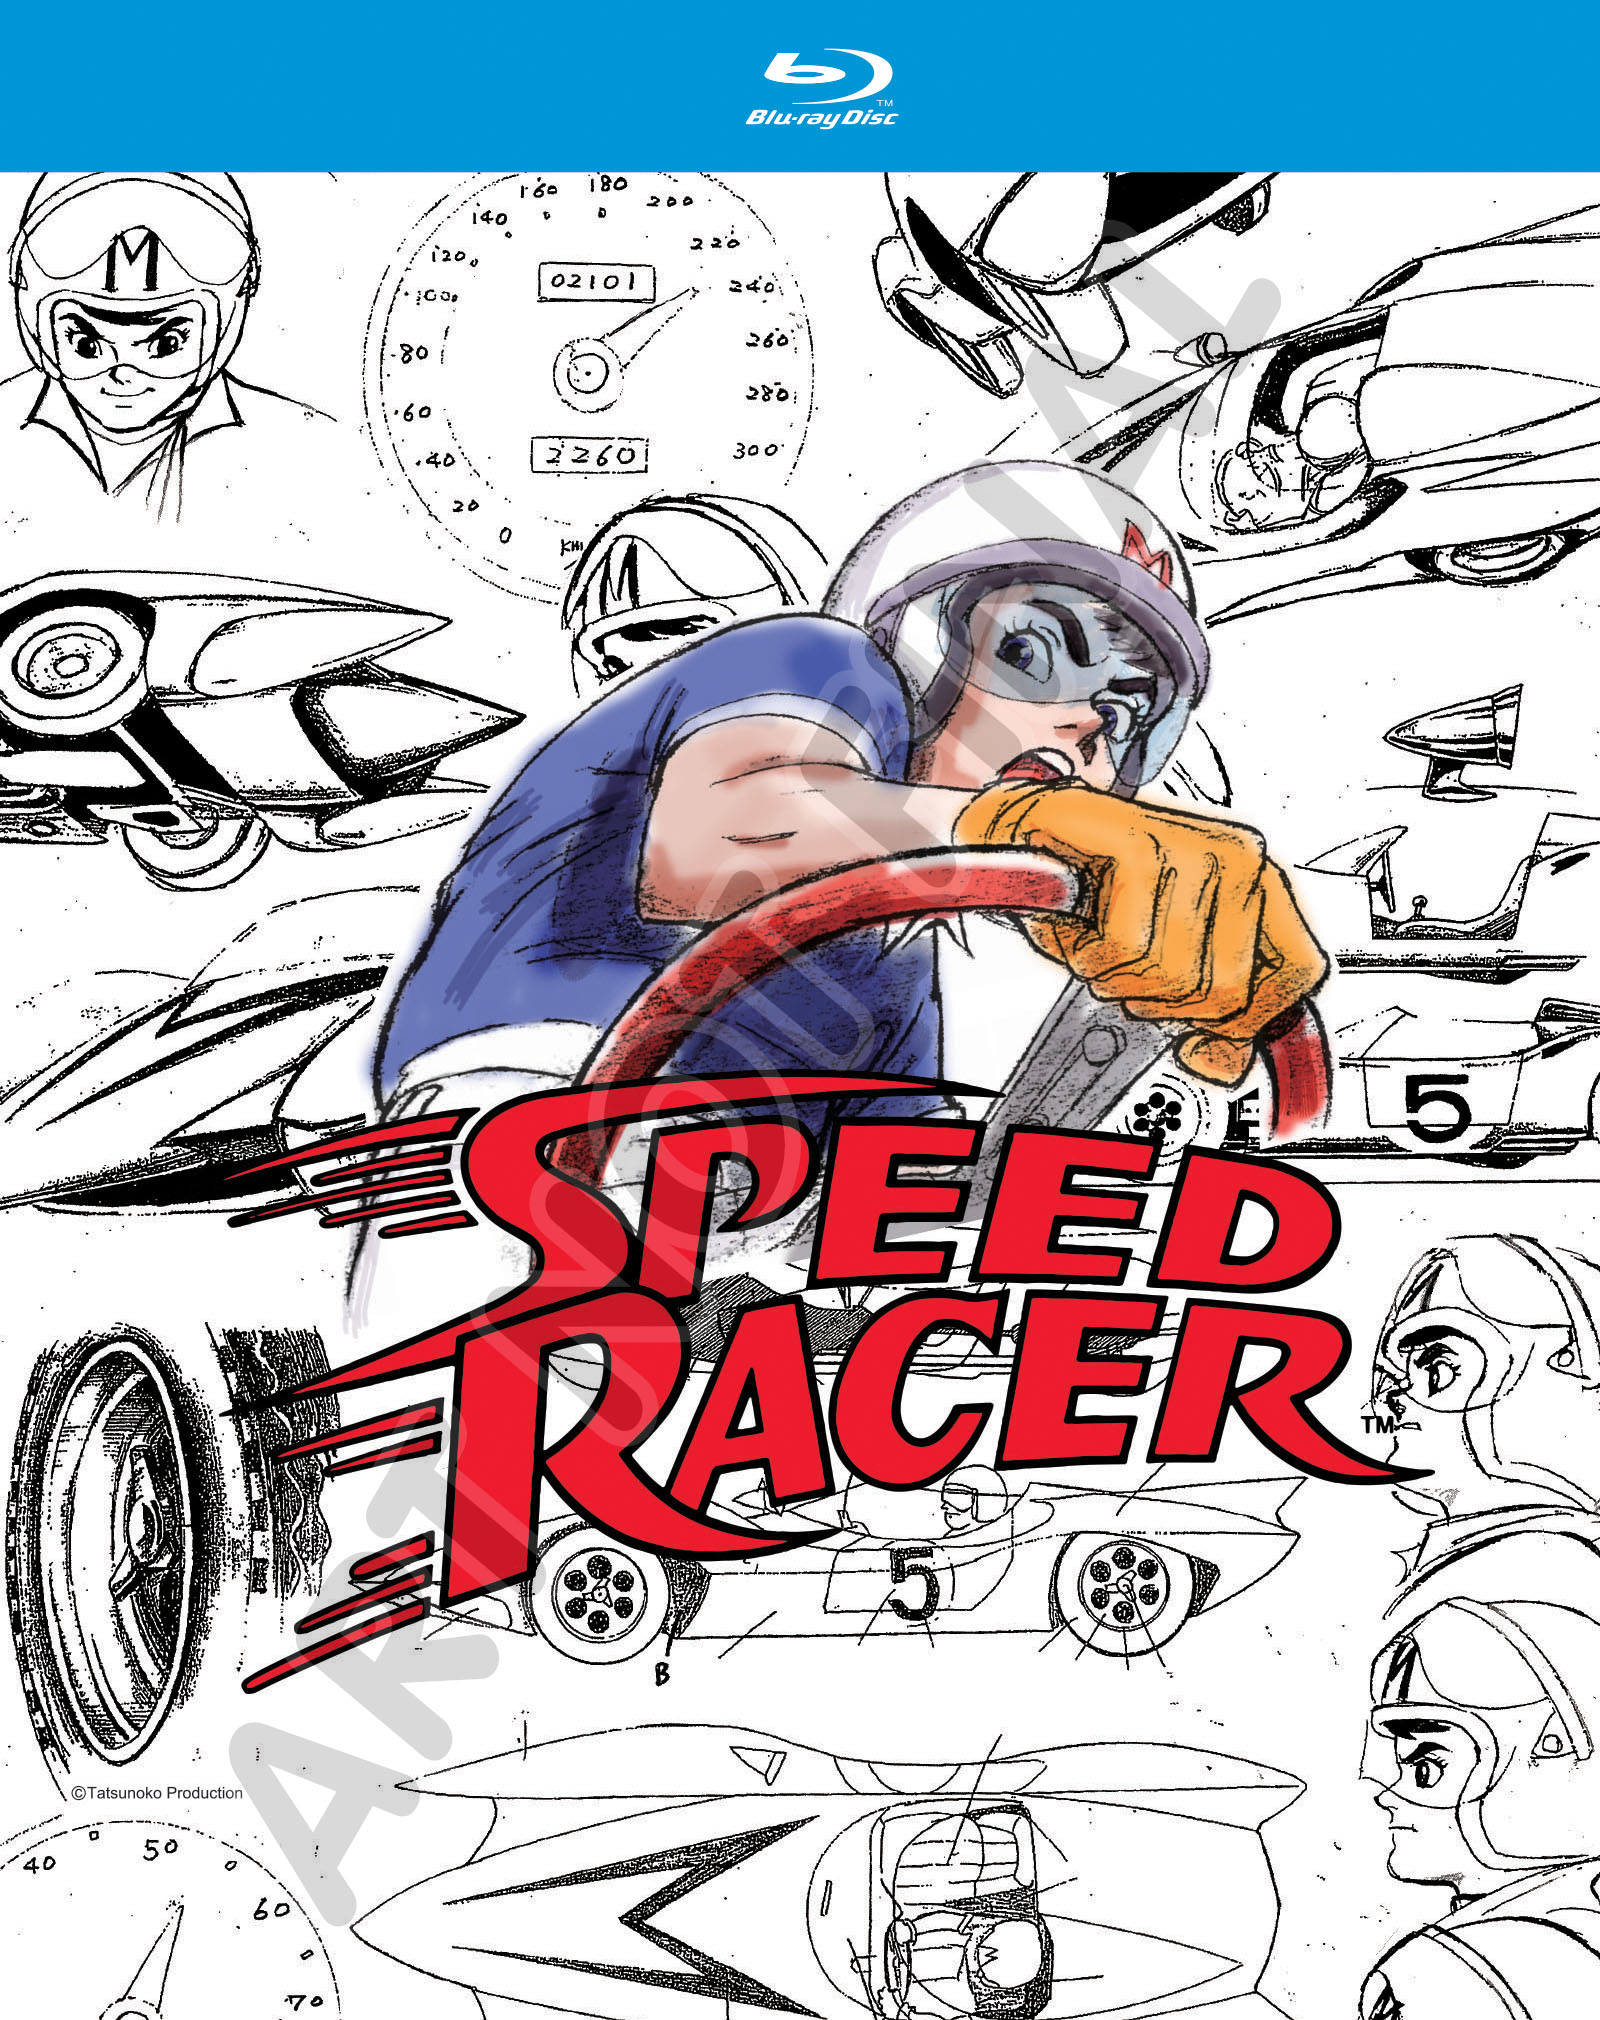 Hey I Draw — I watched a compilation of Speed Racer with guns